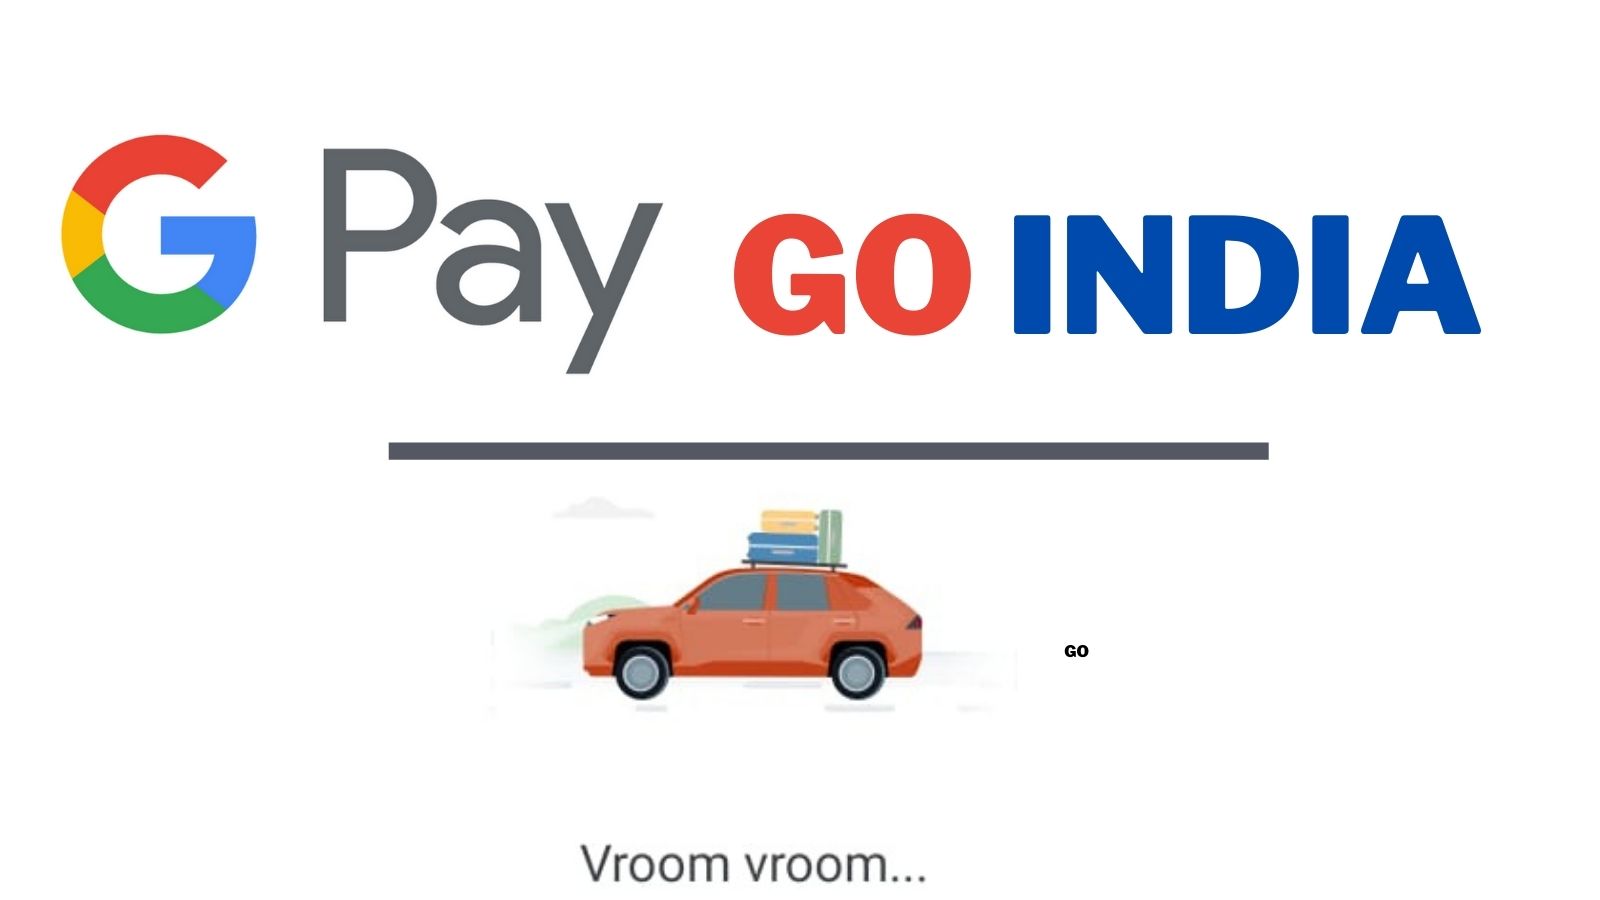 Google Pay Go India Game